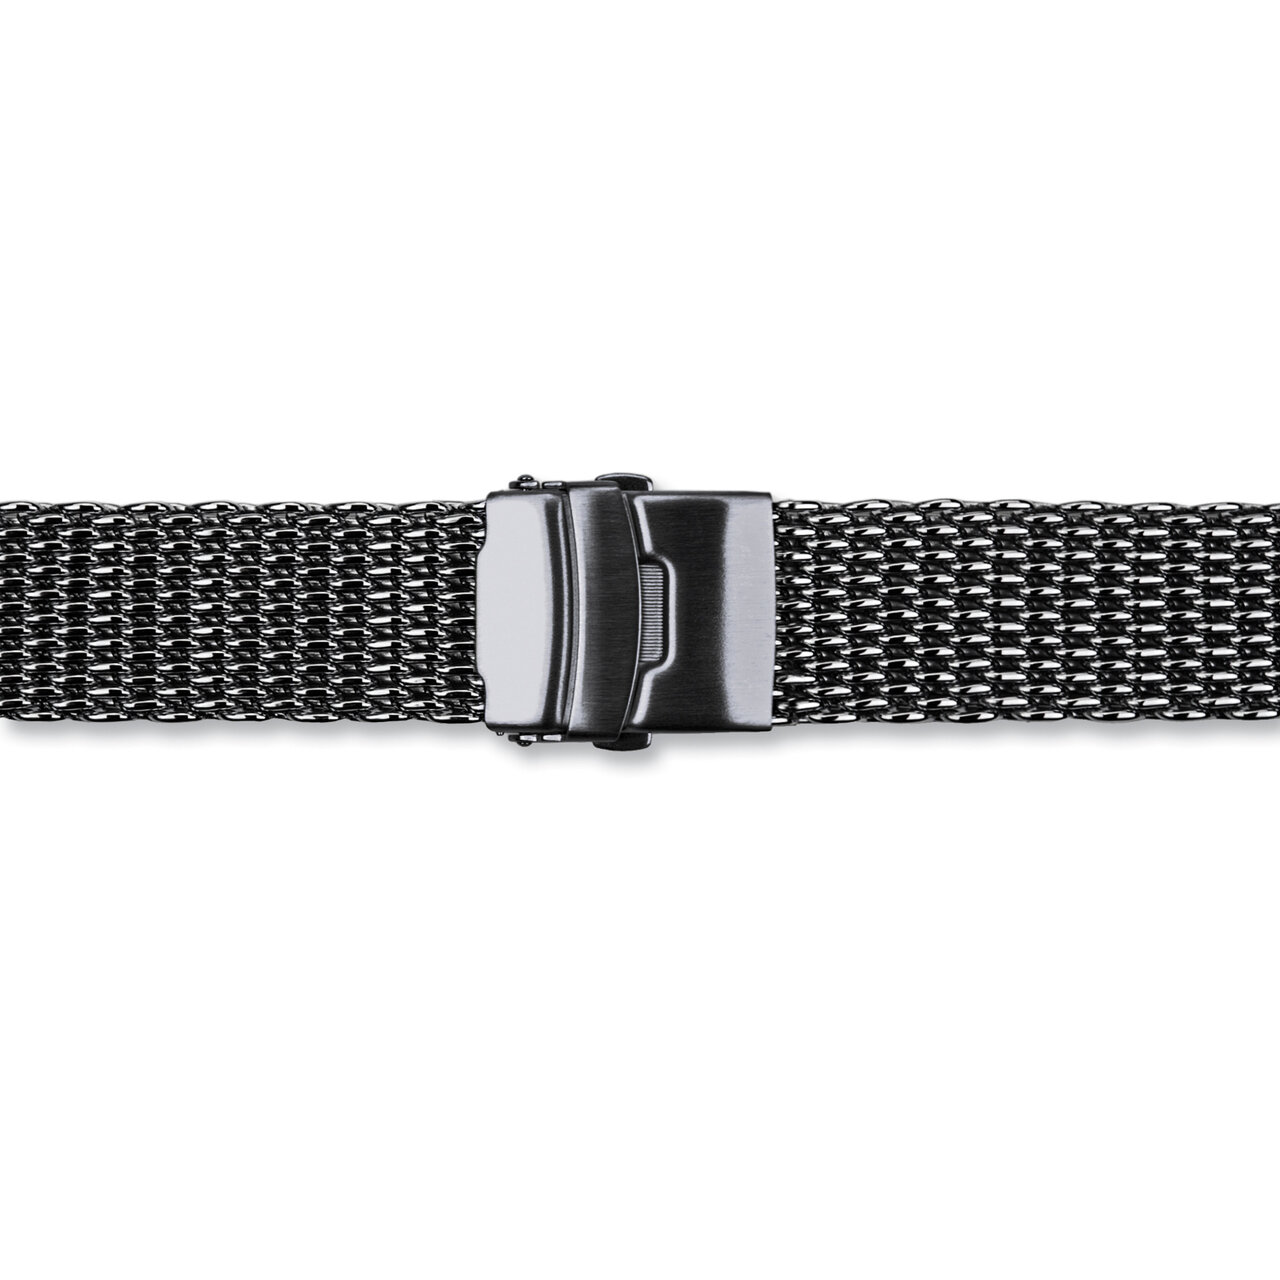 22mm PVD-Black Stainless Shark Mesh with Divers Watch Band BA420-22